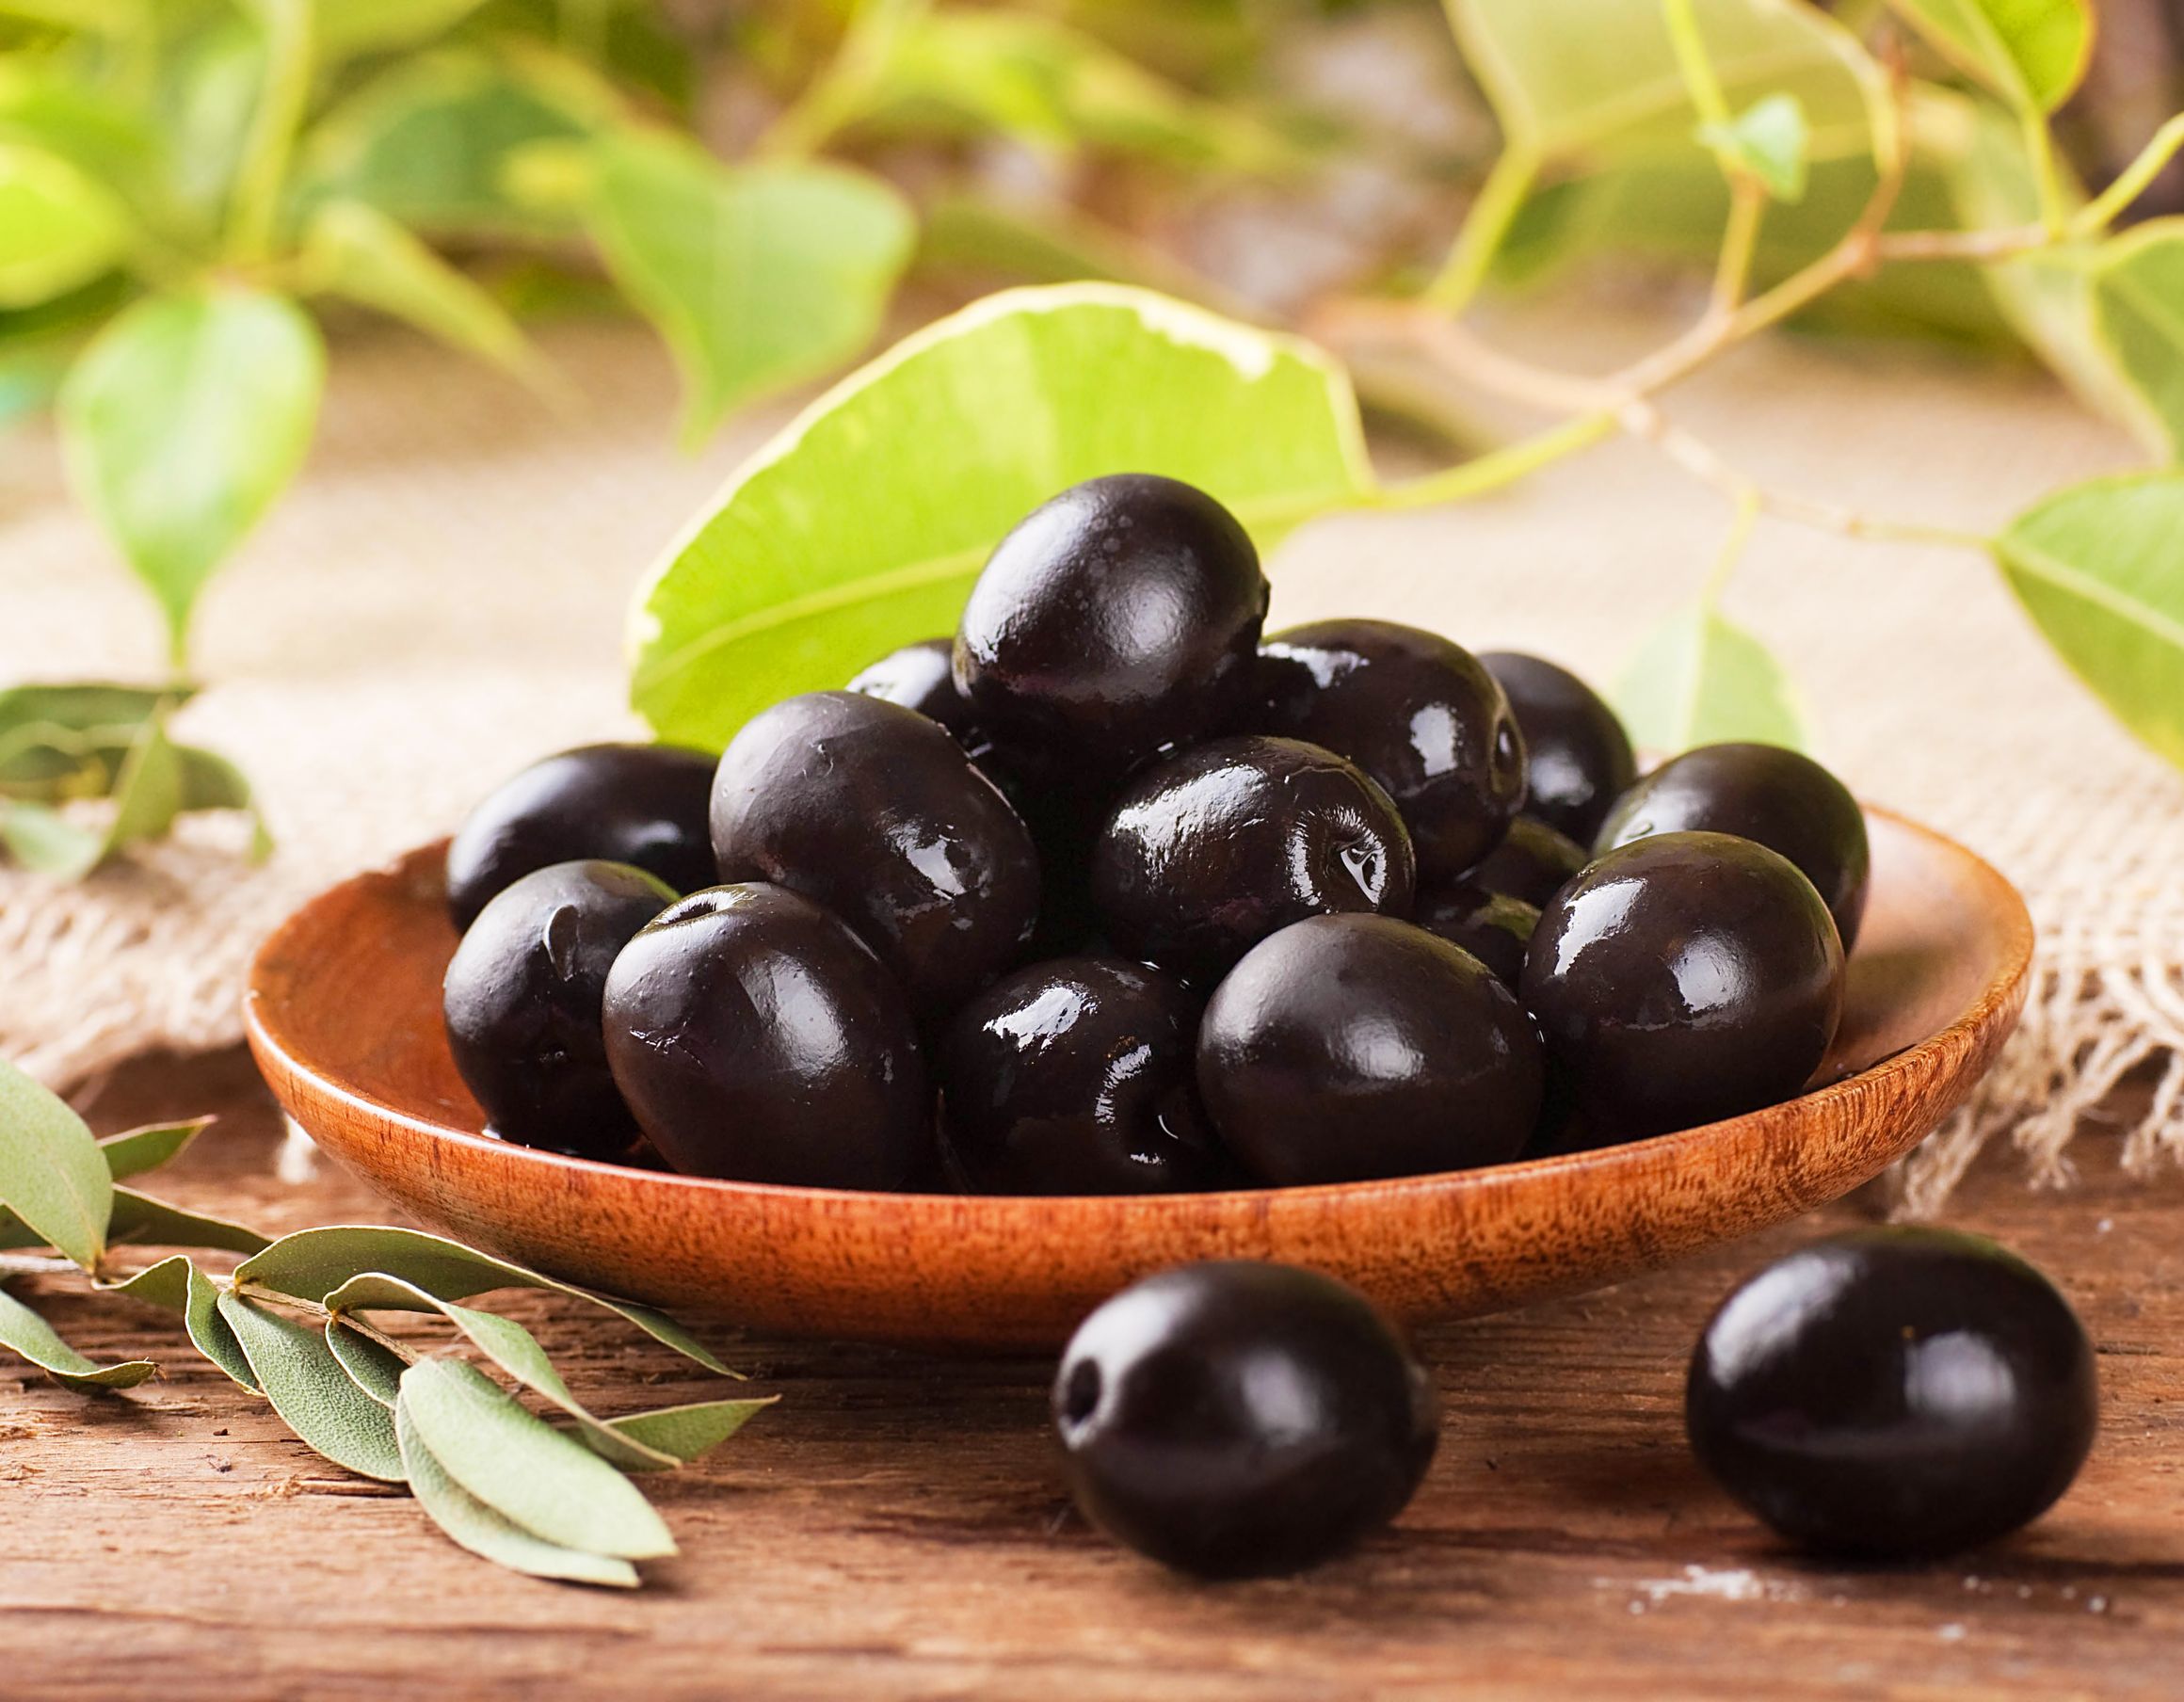 6-awesome-health-benefits-of-olives-that-prove-exactly-why-you-should